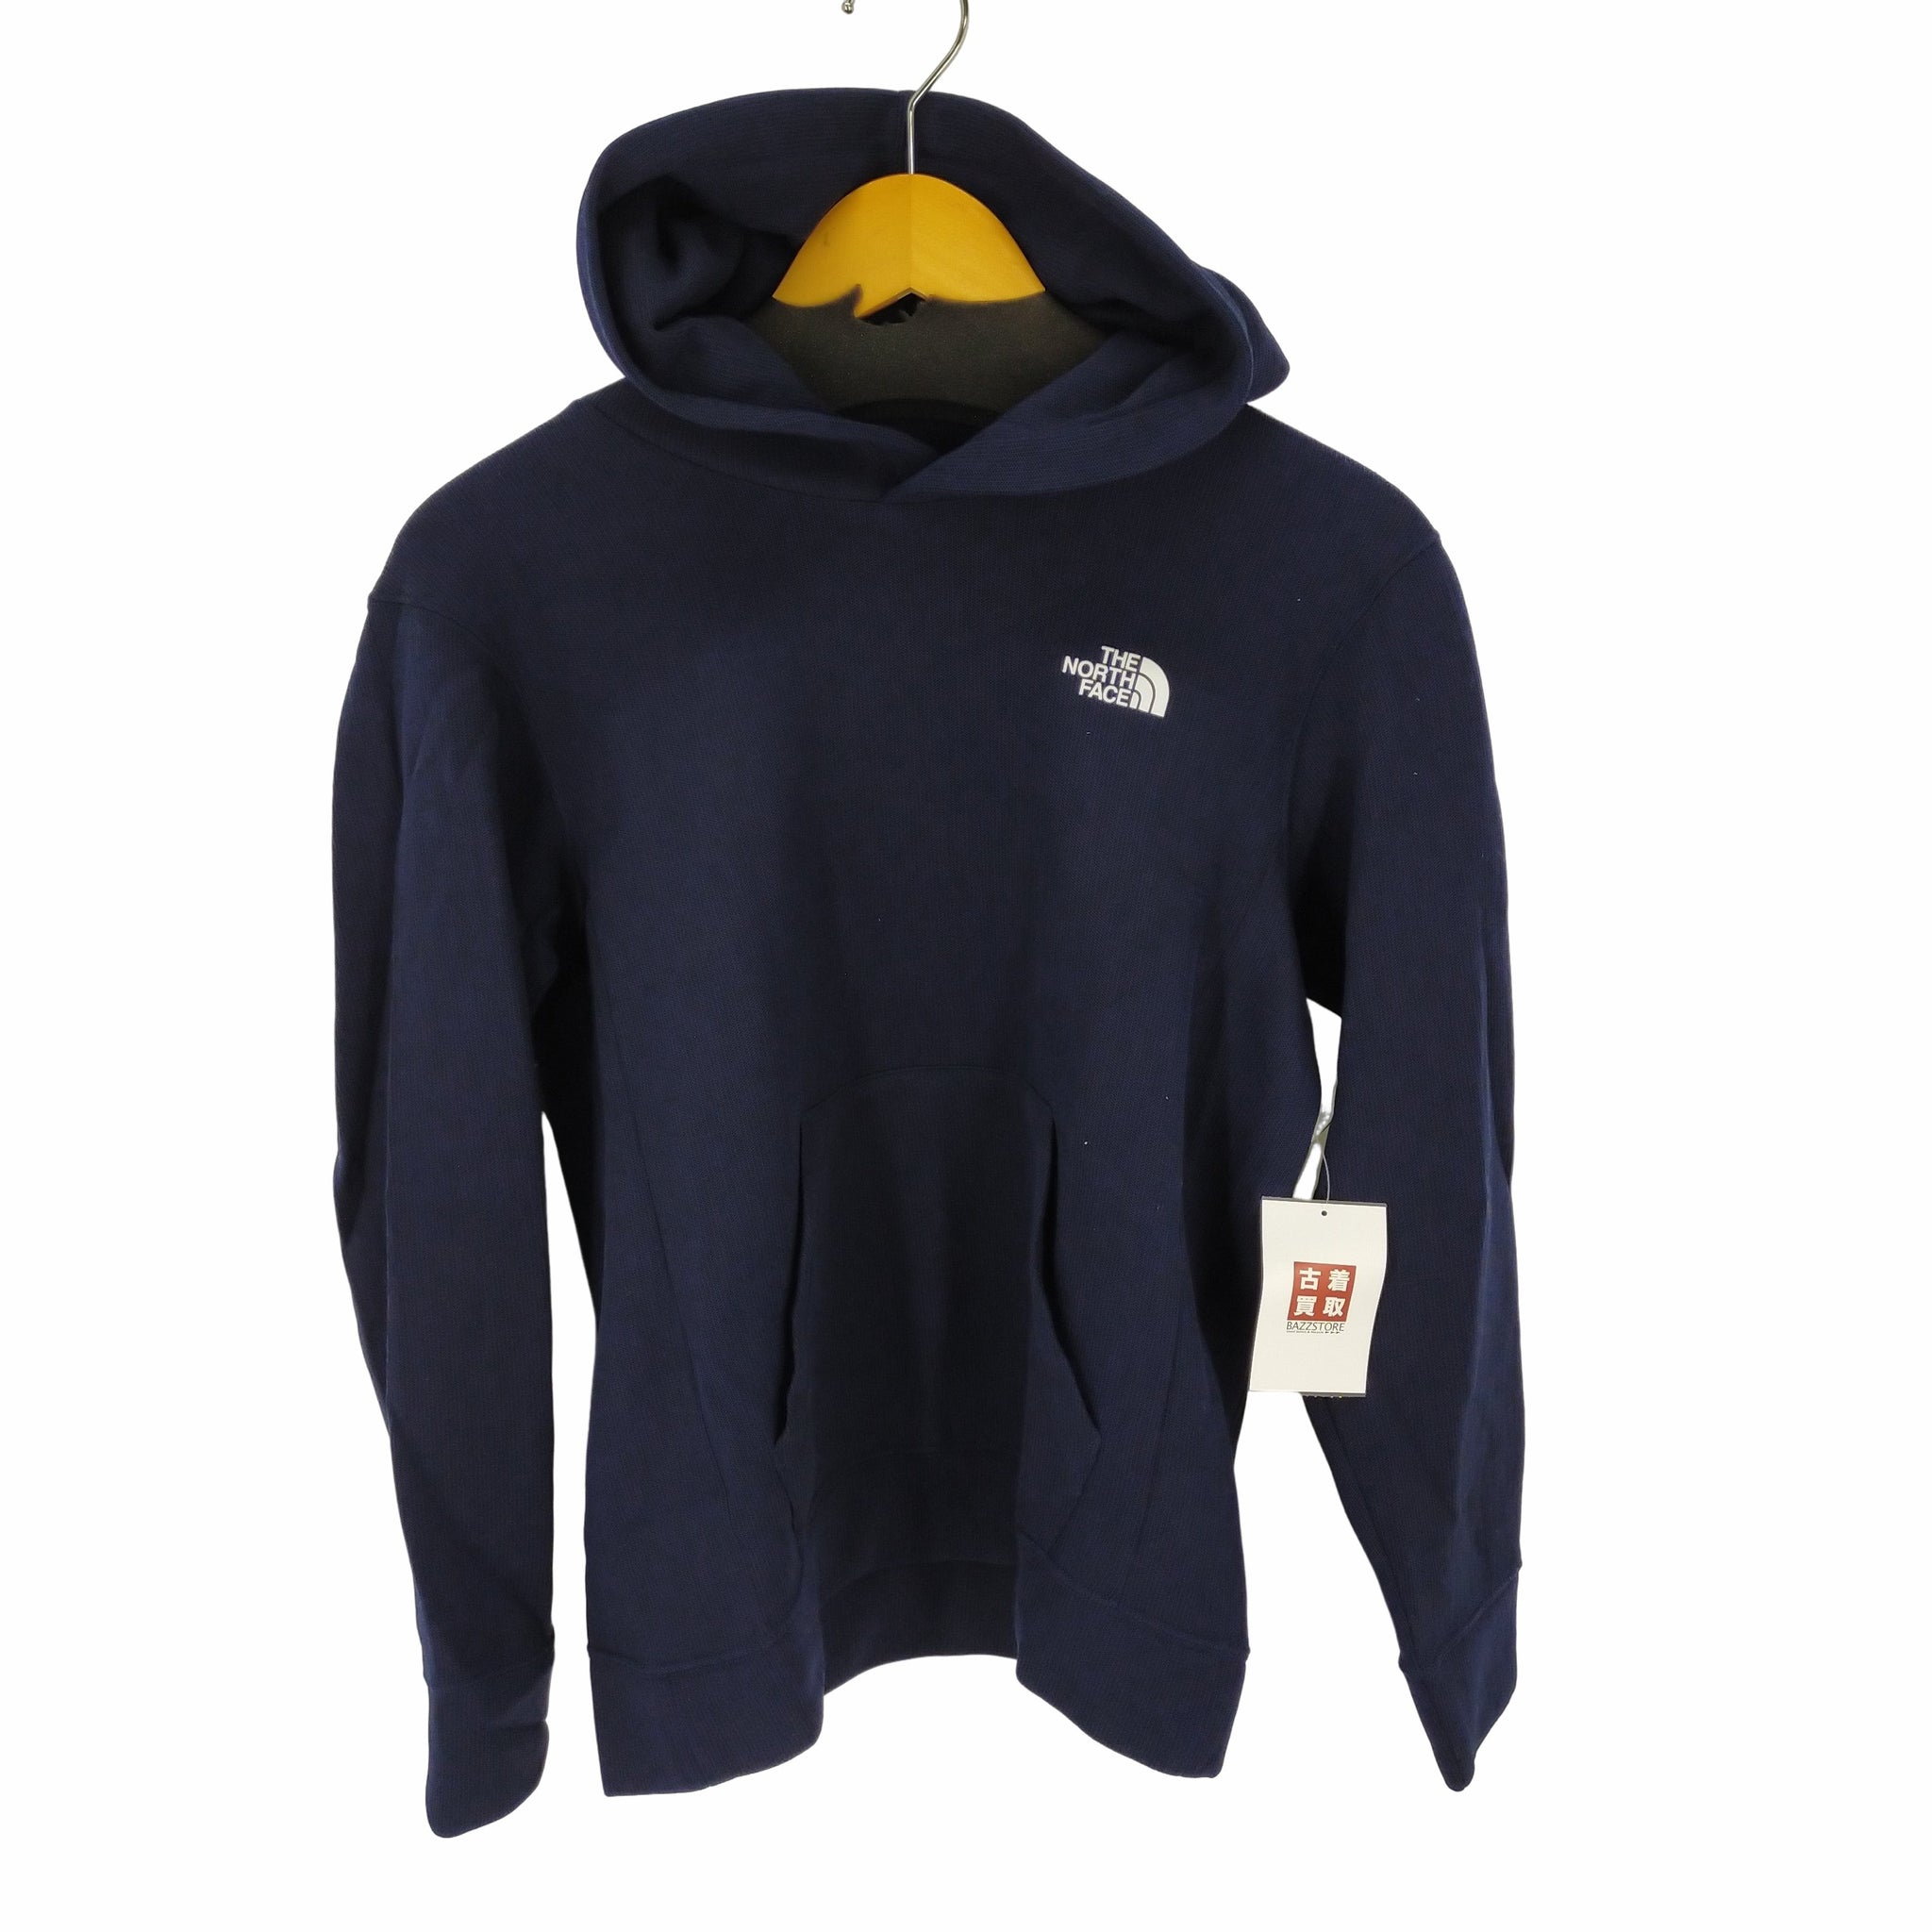 THE NORTH FACE(ザノースフェイス)PUFF HOODIE